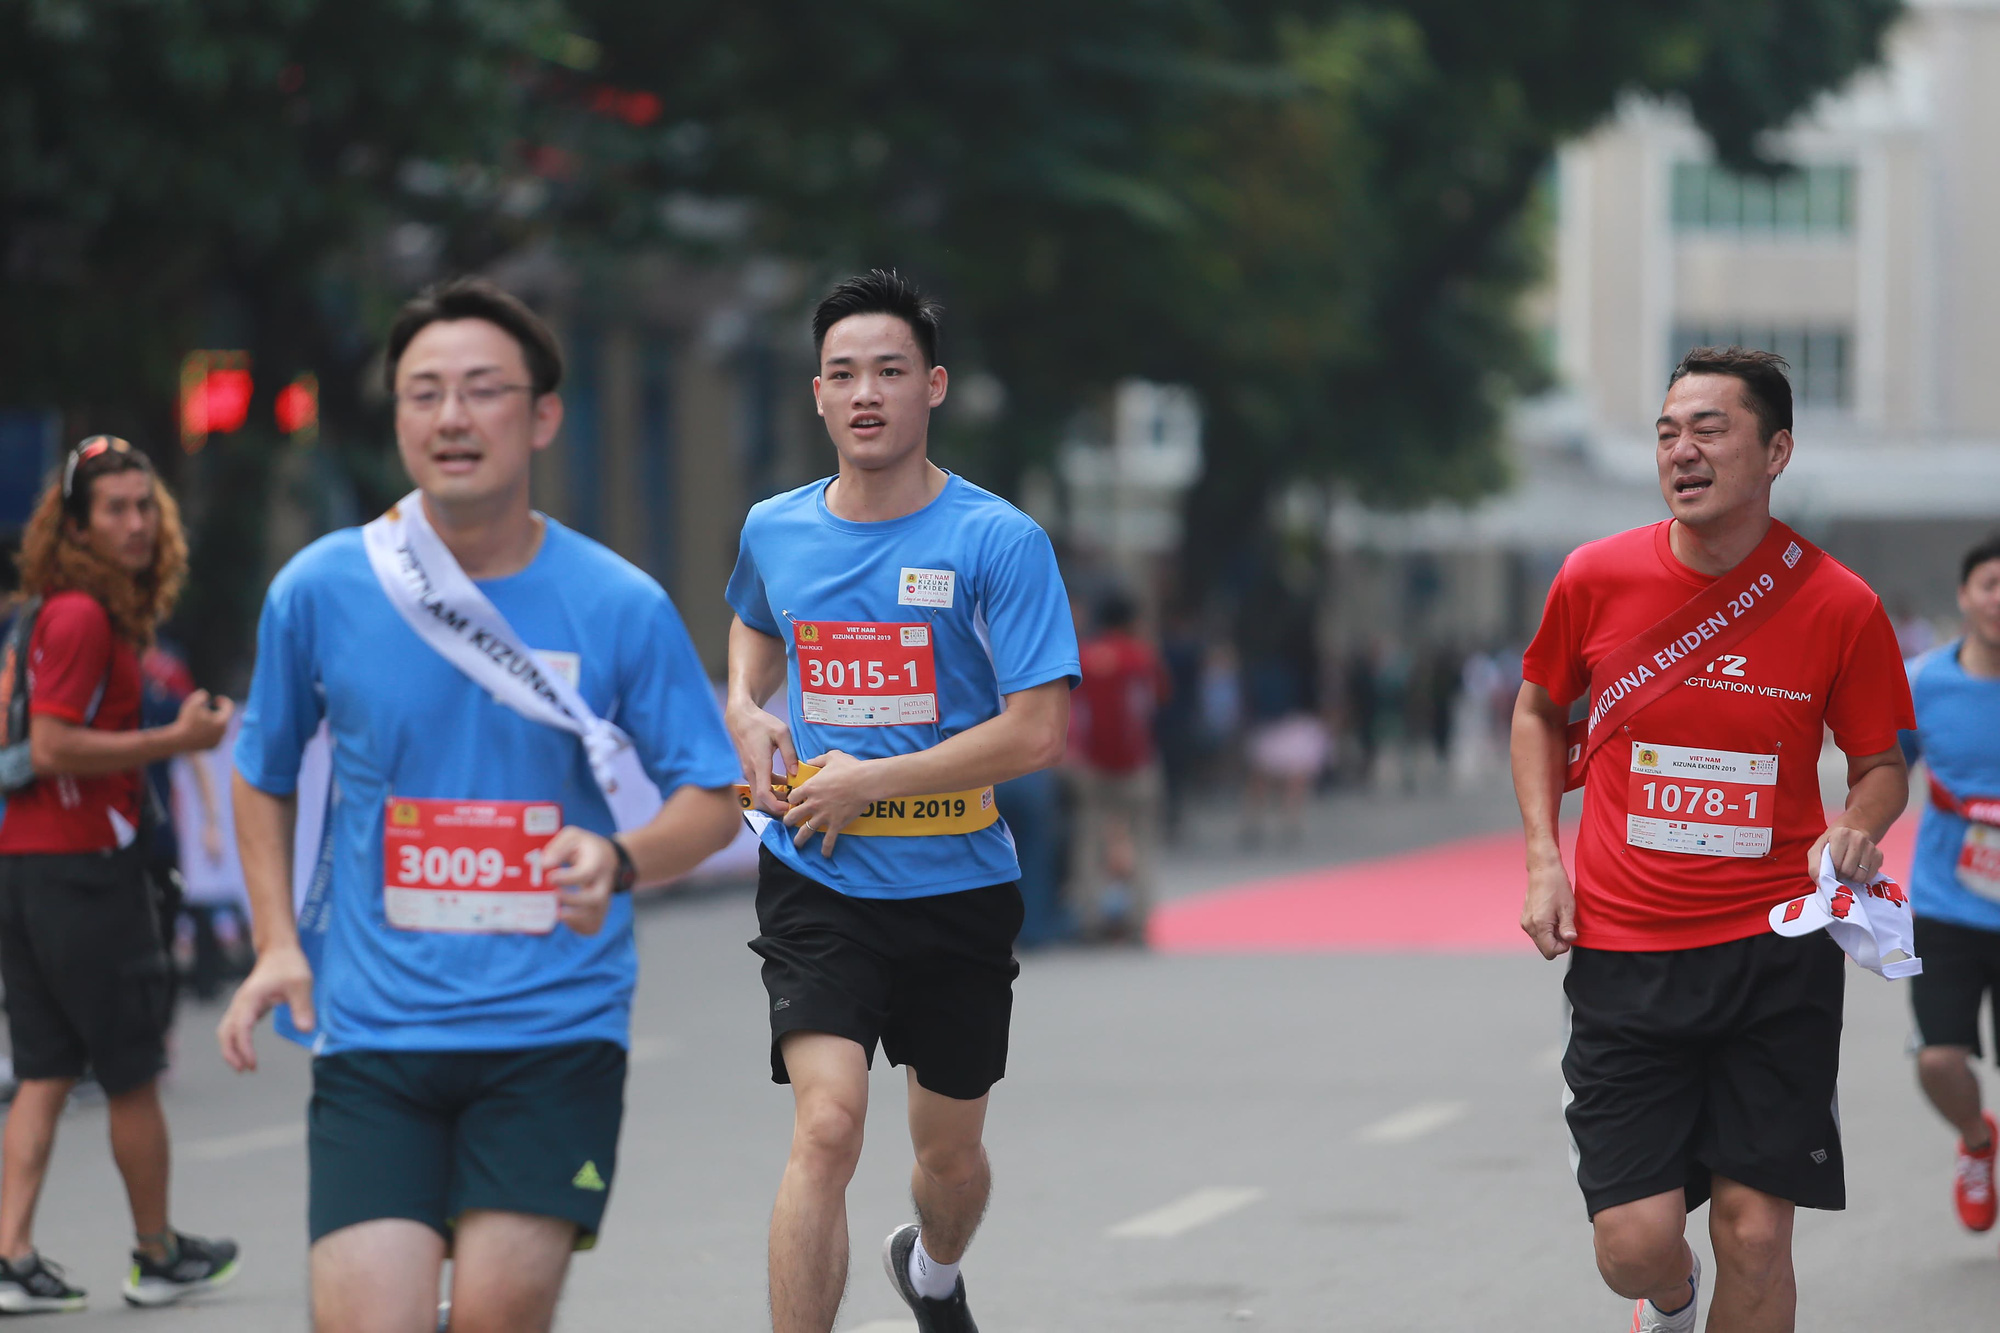 Runners are pictured during the relay race.